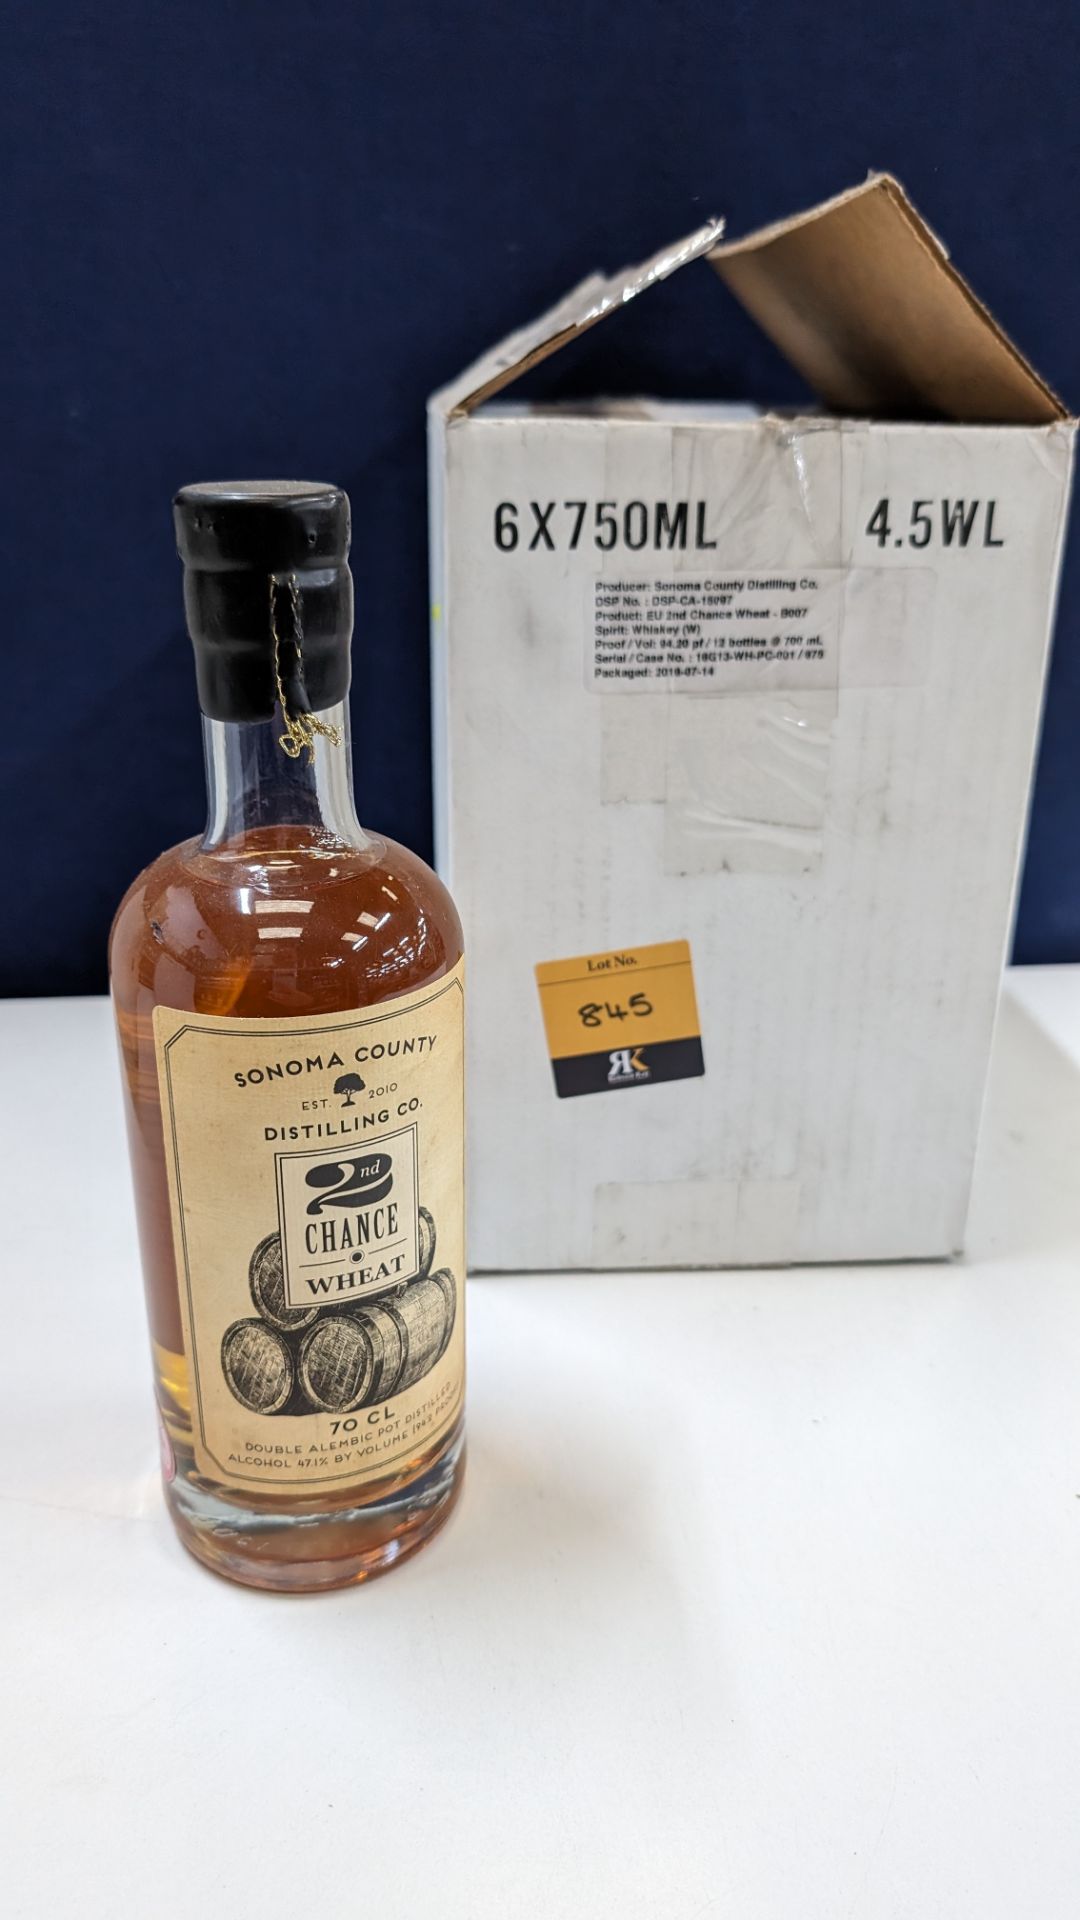 6 off 700ml bottles of Sonoma County 2nd Chance Wheat Double Alembic Pot Distilled Whiskey. In white - Image 2 of 8